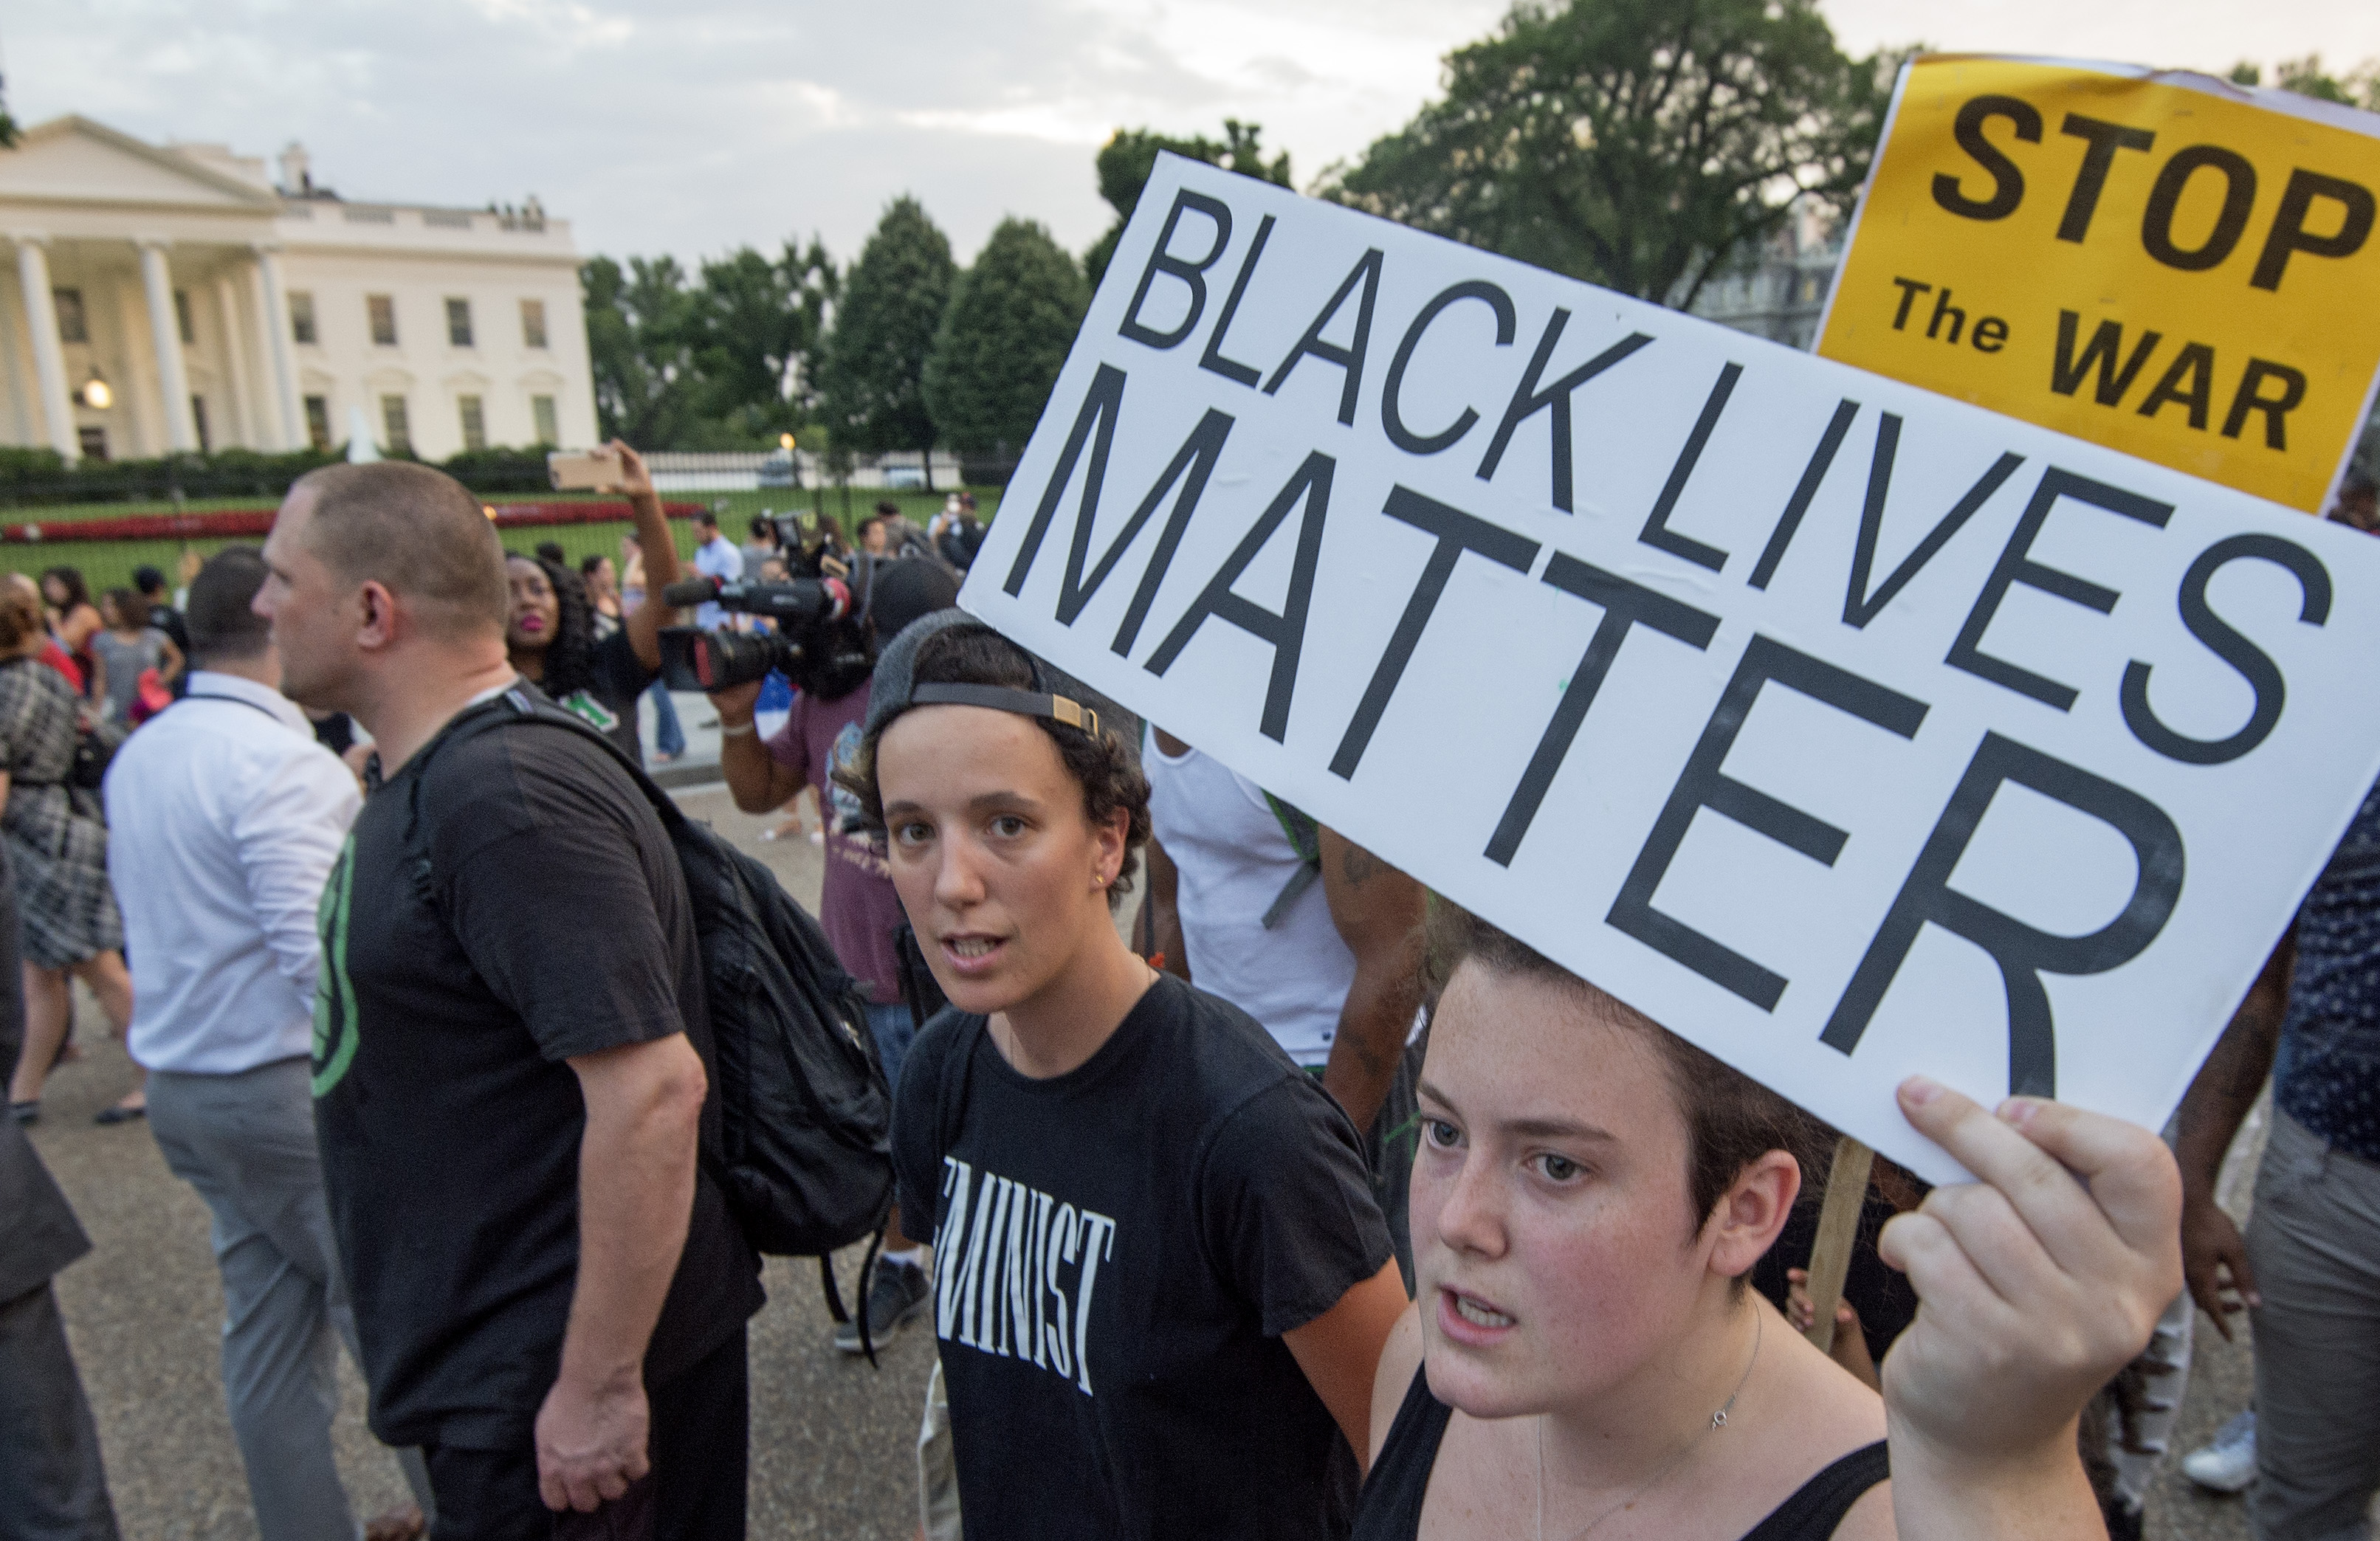 Protestors rally outside the White House in Washington, DC on July 7, 201. Black motorist Philando Castile, 32, a school cafeteria worker, was shot at close range by a Minnesota cop and seen bleeding to death in a graphic video shot by his girlfriend that went viral Thursday, the second fatal police shooting to rock America in as many days. / AFP PHOTO / PAUL J. RICHARDS